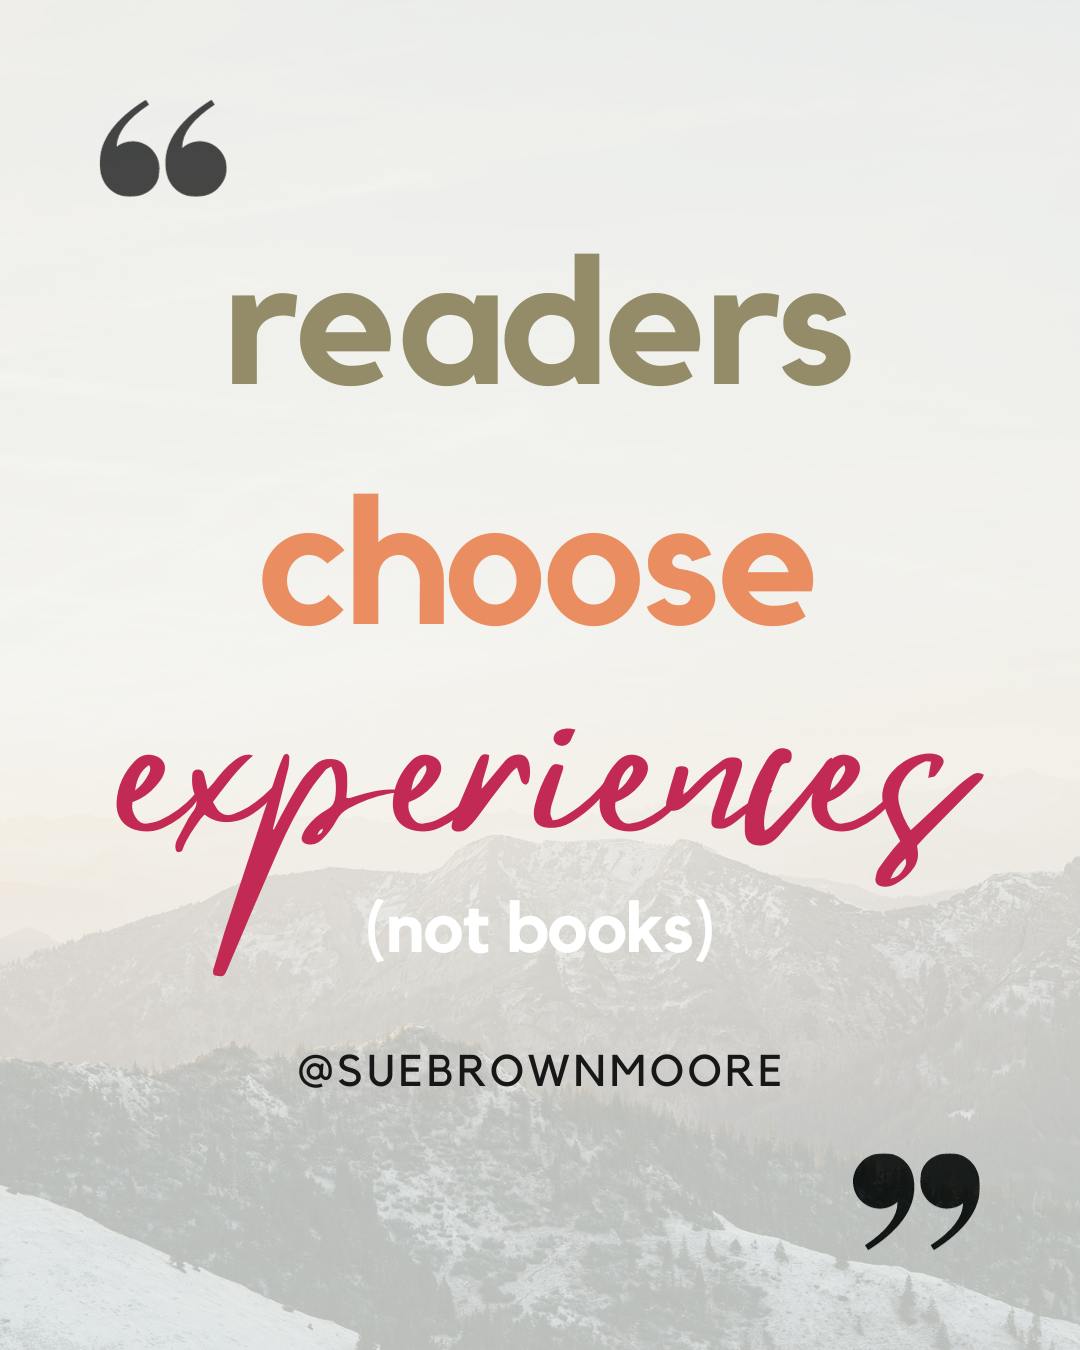 readers choose experiences text over a faded snowy mountain range